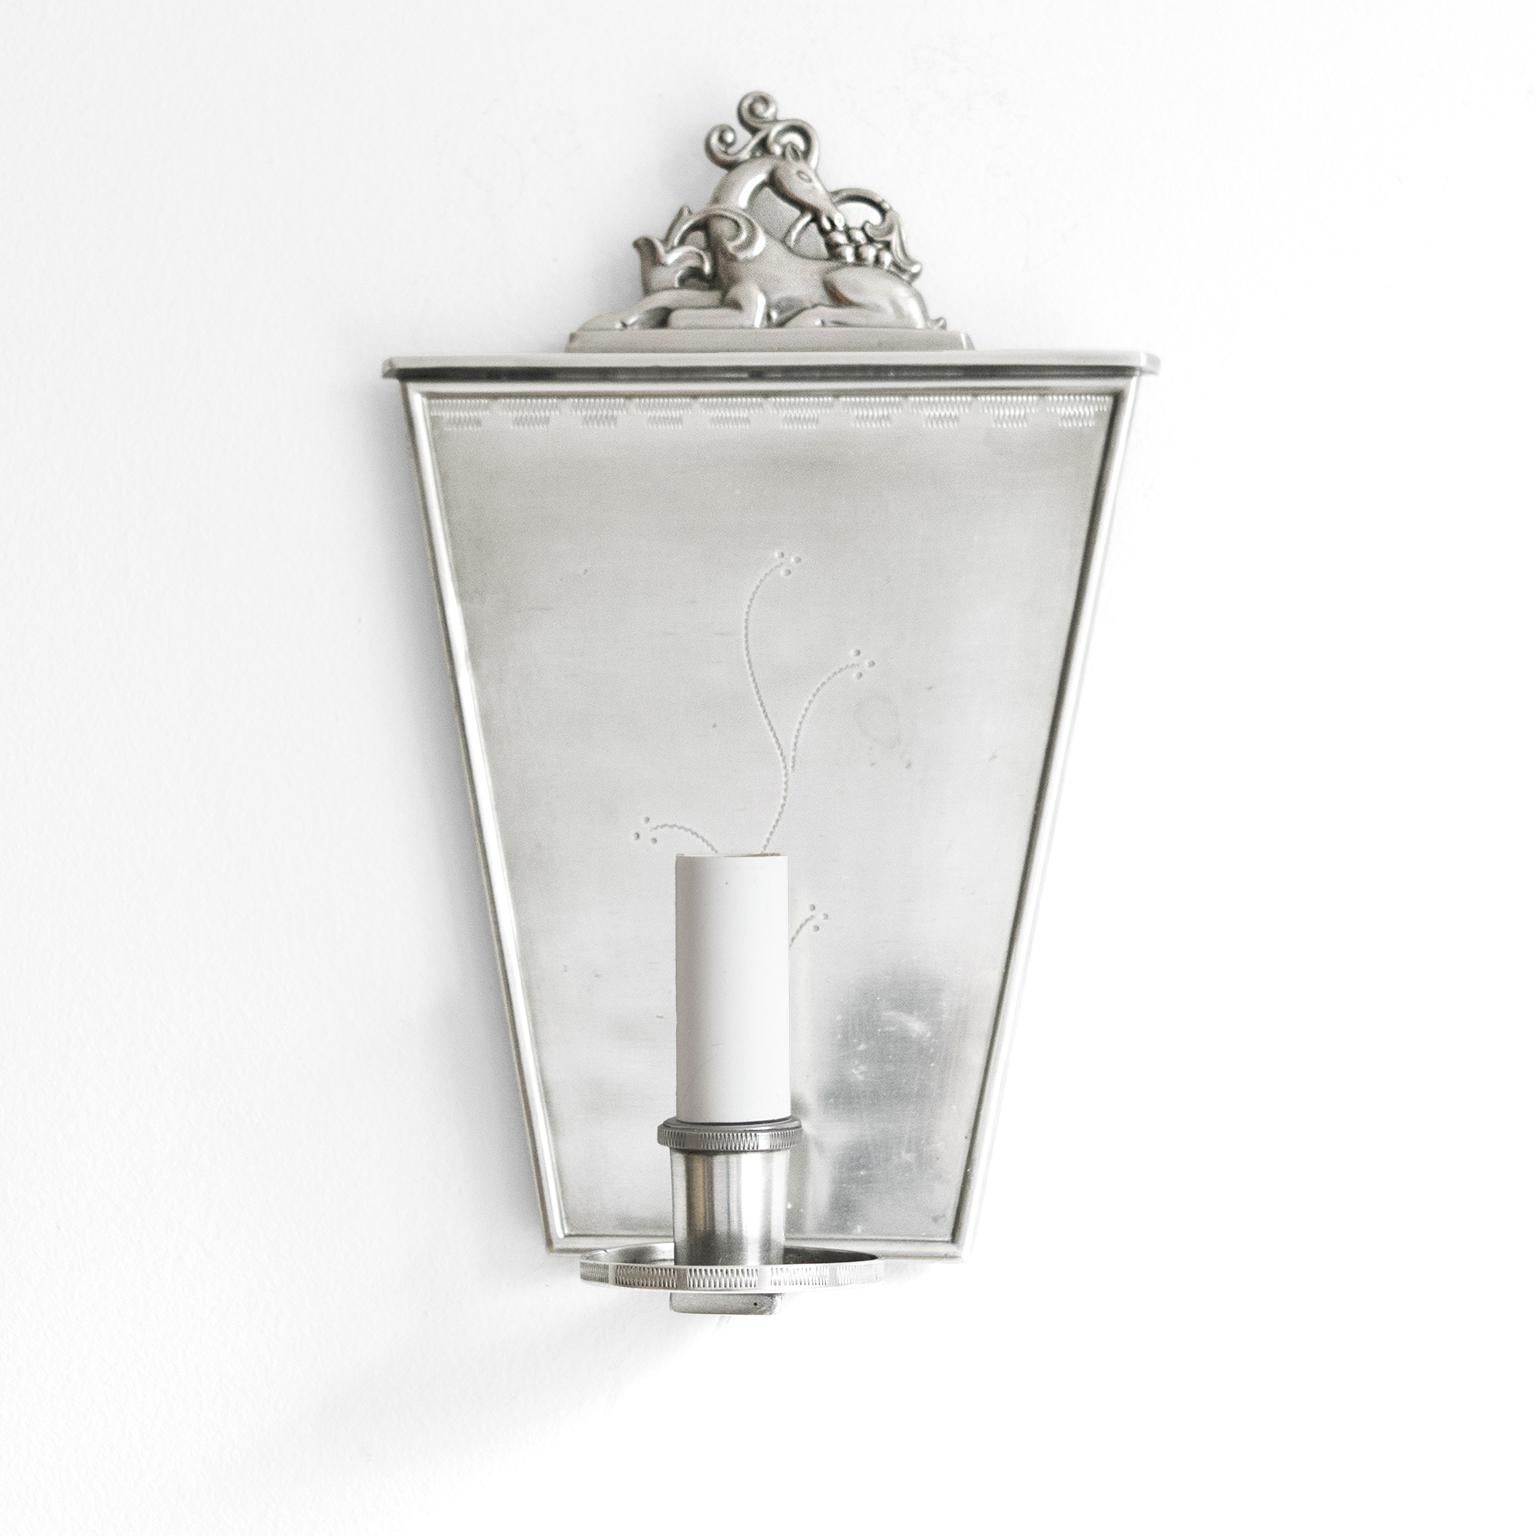 Lacquered Pair of Swedish Grace polished Pewter Sconces by, C.G. Hallberg, Stockholm